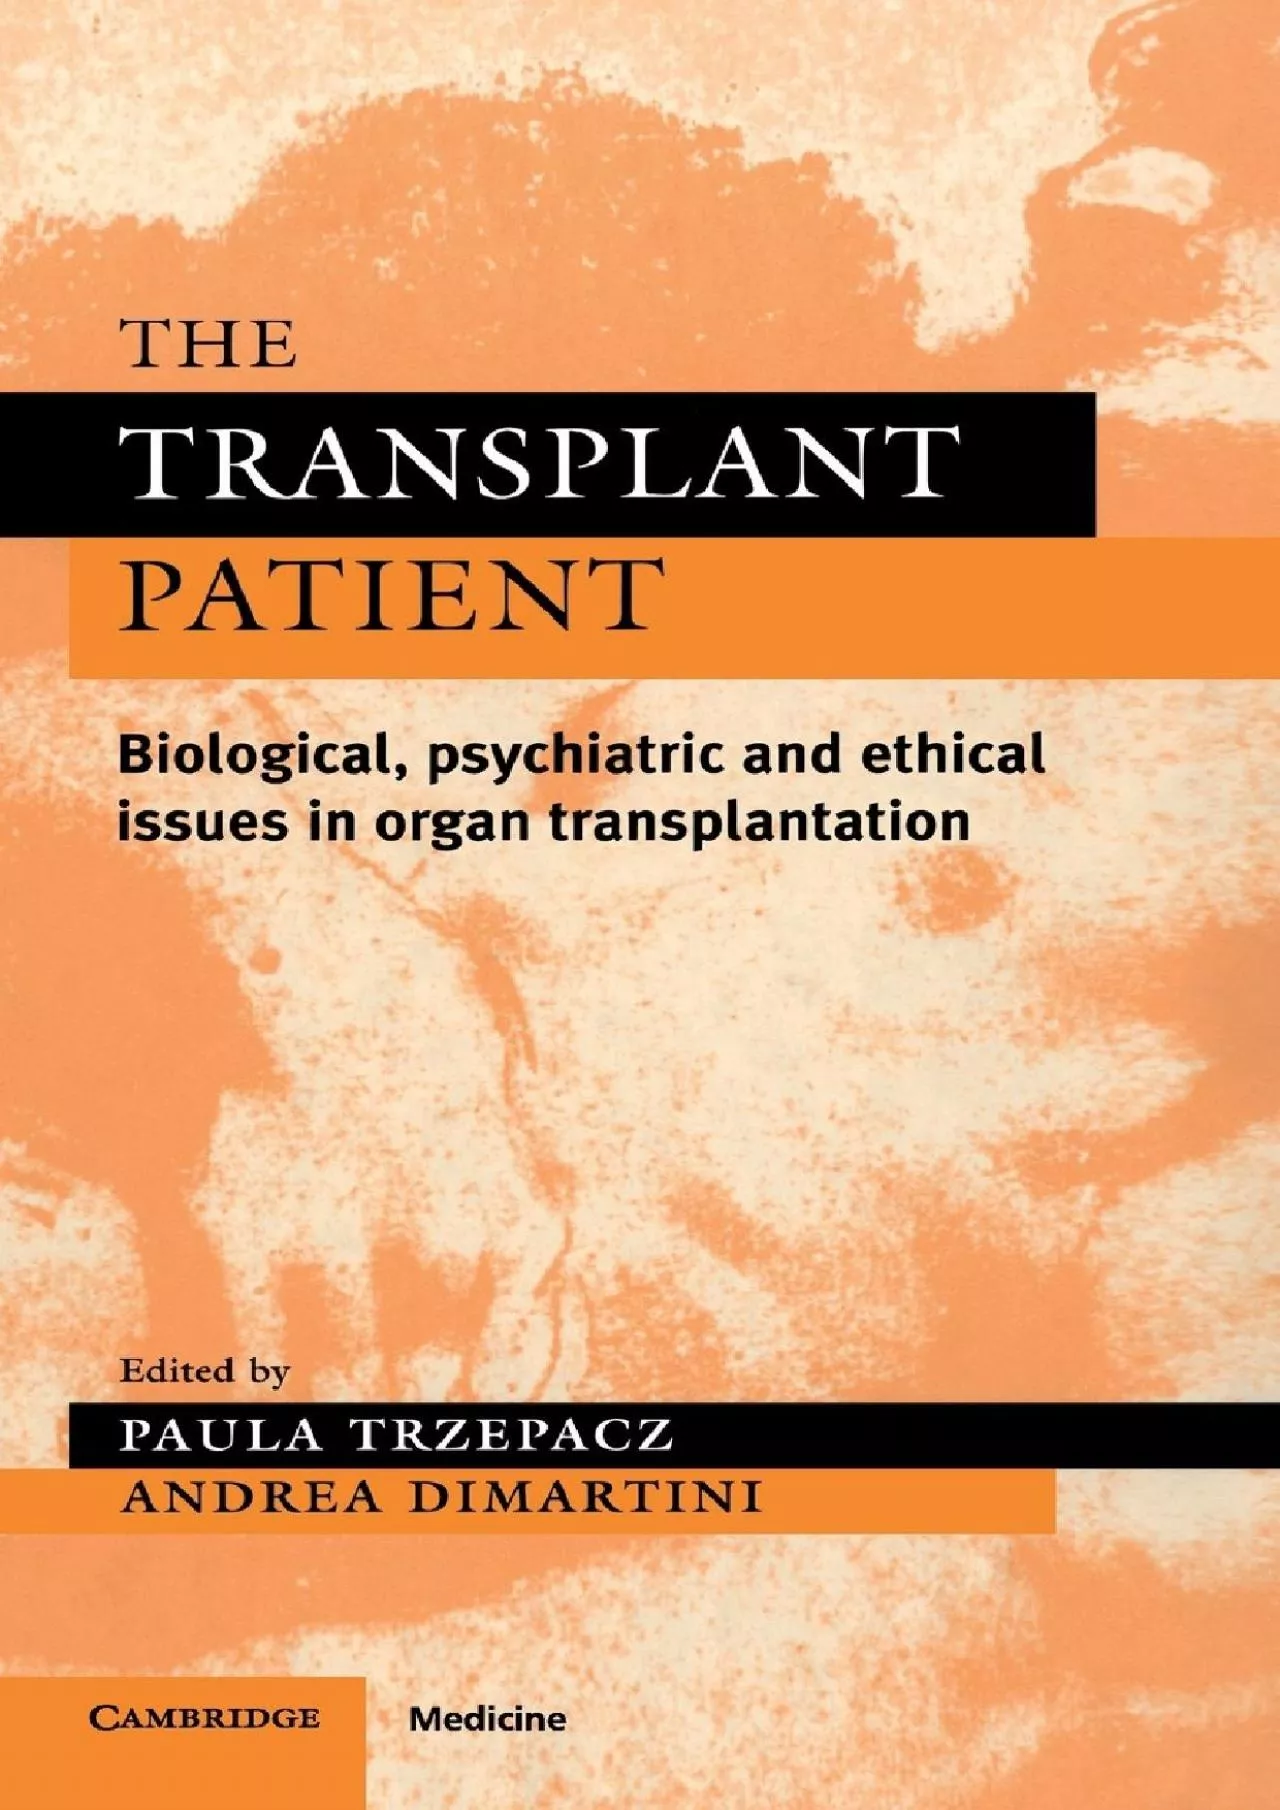 (BOOS)-The Transplant Patient: Biological, Psychiatric and Ethical Issues in Organ Transplantation